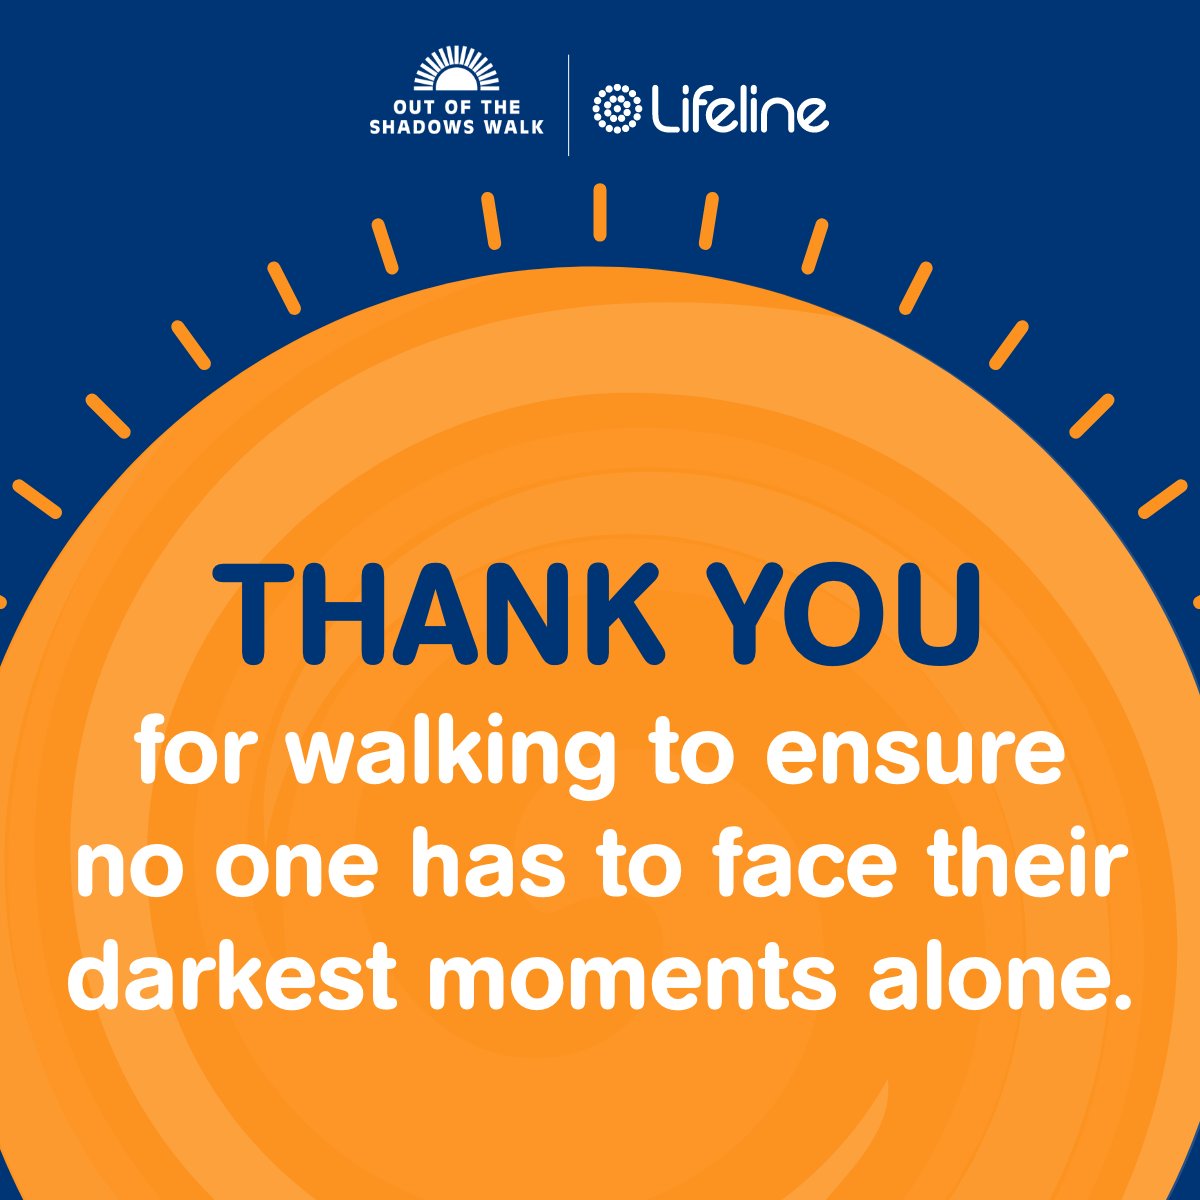 Out of the Shadows Walk is tomorrow on World Suicide Prevention Day to remember those lives lost to suicide and help people in crisis. Good luck tomorrow, let's shine a light with every step to bring hope and save lives. ☀️ outoftheshadowswalk.org.au